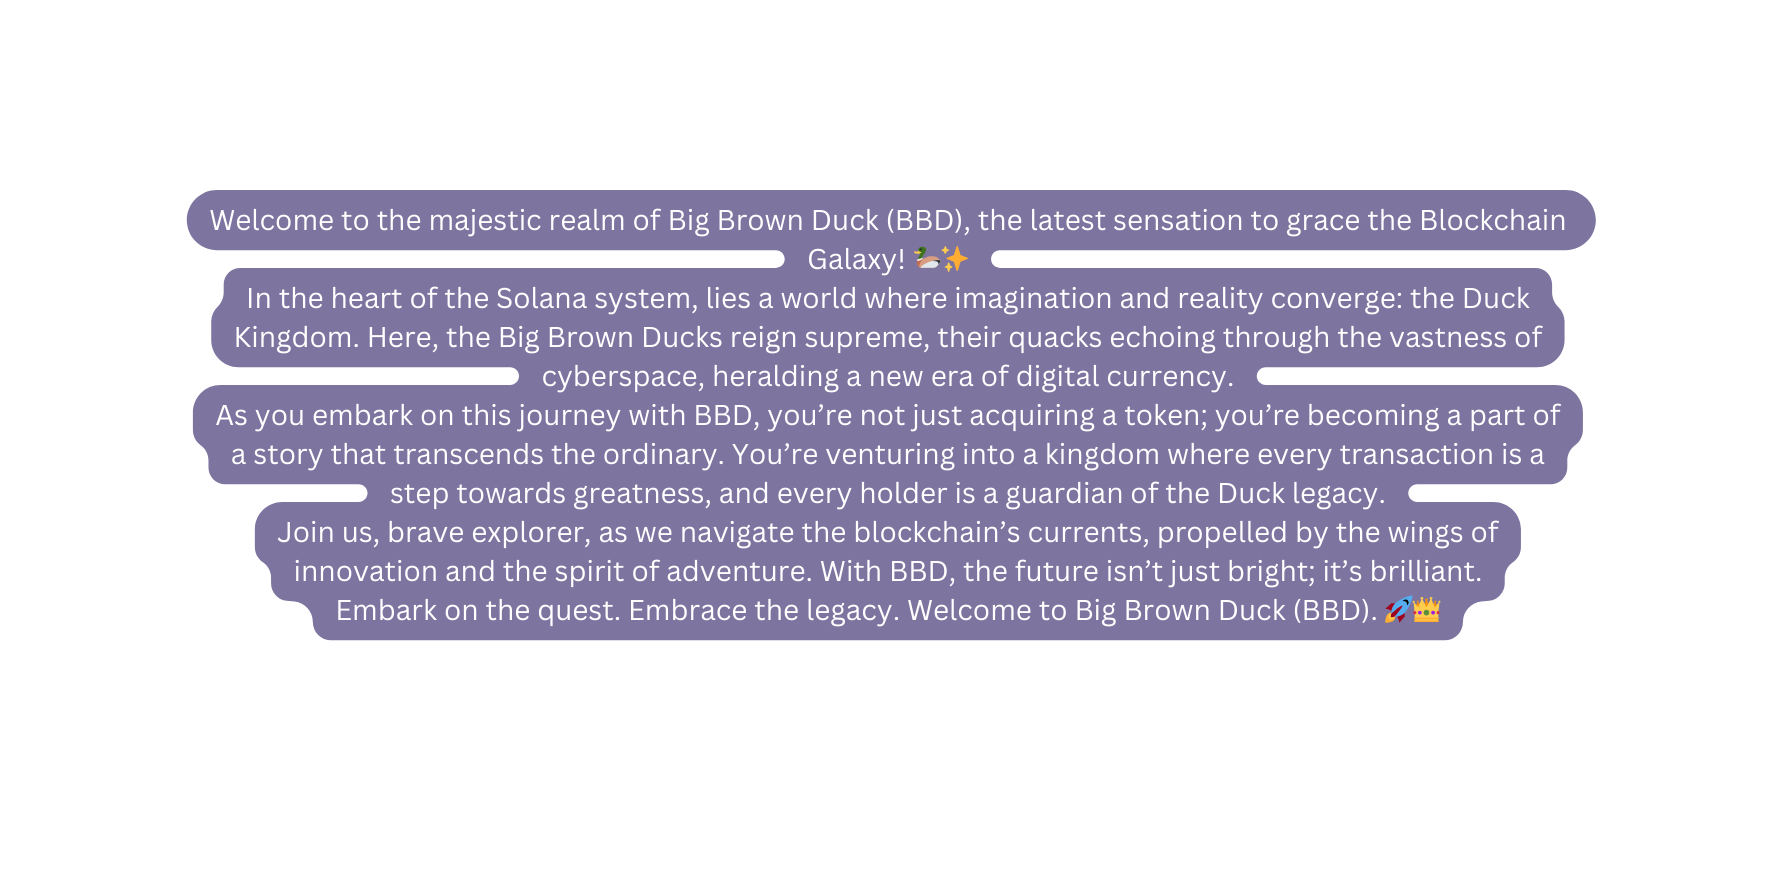 Welcome to the majestic realm of Big Brown Duck BBD the latest sensation to grace the Blockchain Galaxy In the heart of the Solana system lies a world where imagination and reality converge the Duck Kingdom Here the Big Brown Ducks reign supreme their quacks echoing through the vastness of cyberspace heralding a new era of digital currency As you embark on this journey with BBD you re not just acquiring a token you re becoming a part of a story that transcends the ordinary You re venturing into a kingdom where every transaction is a step towards greatness and every holder is a guardian of the Duck legacy Join us brave explorer as we navigate the blockchain s currents propelled by the wings of innovation and the spirit of adventure With BBD the future isn t just bright it s brilliant Embark on the quest Embrace the legacy Welcome to Big Brown Duck BBD